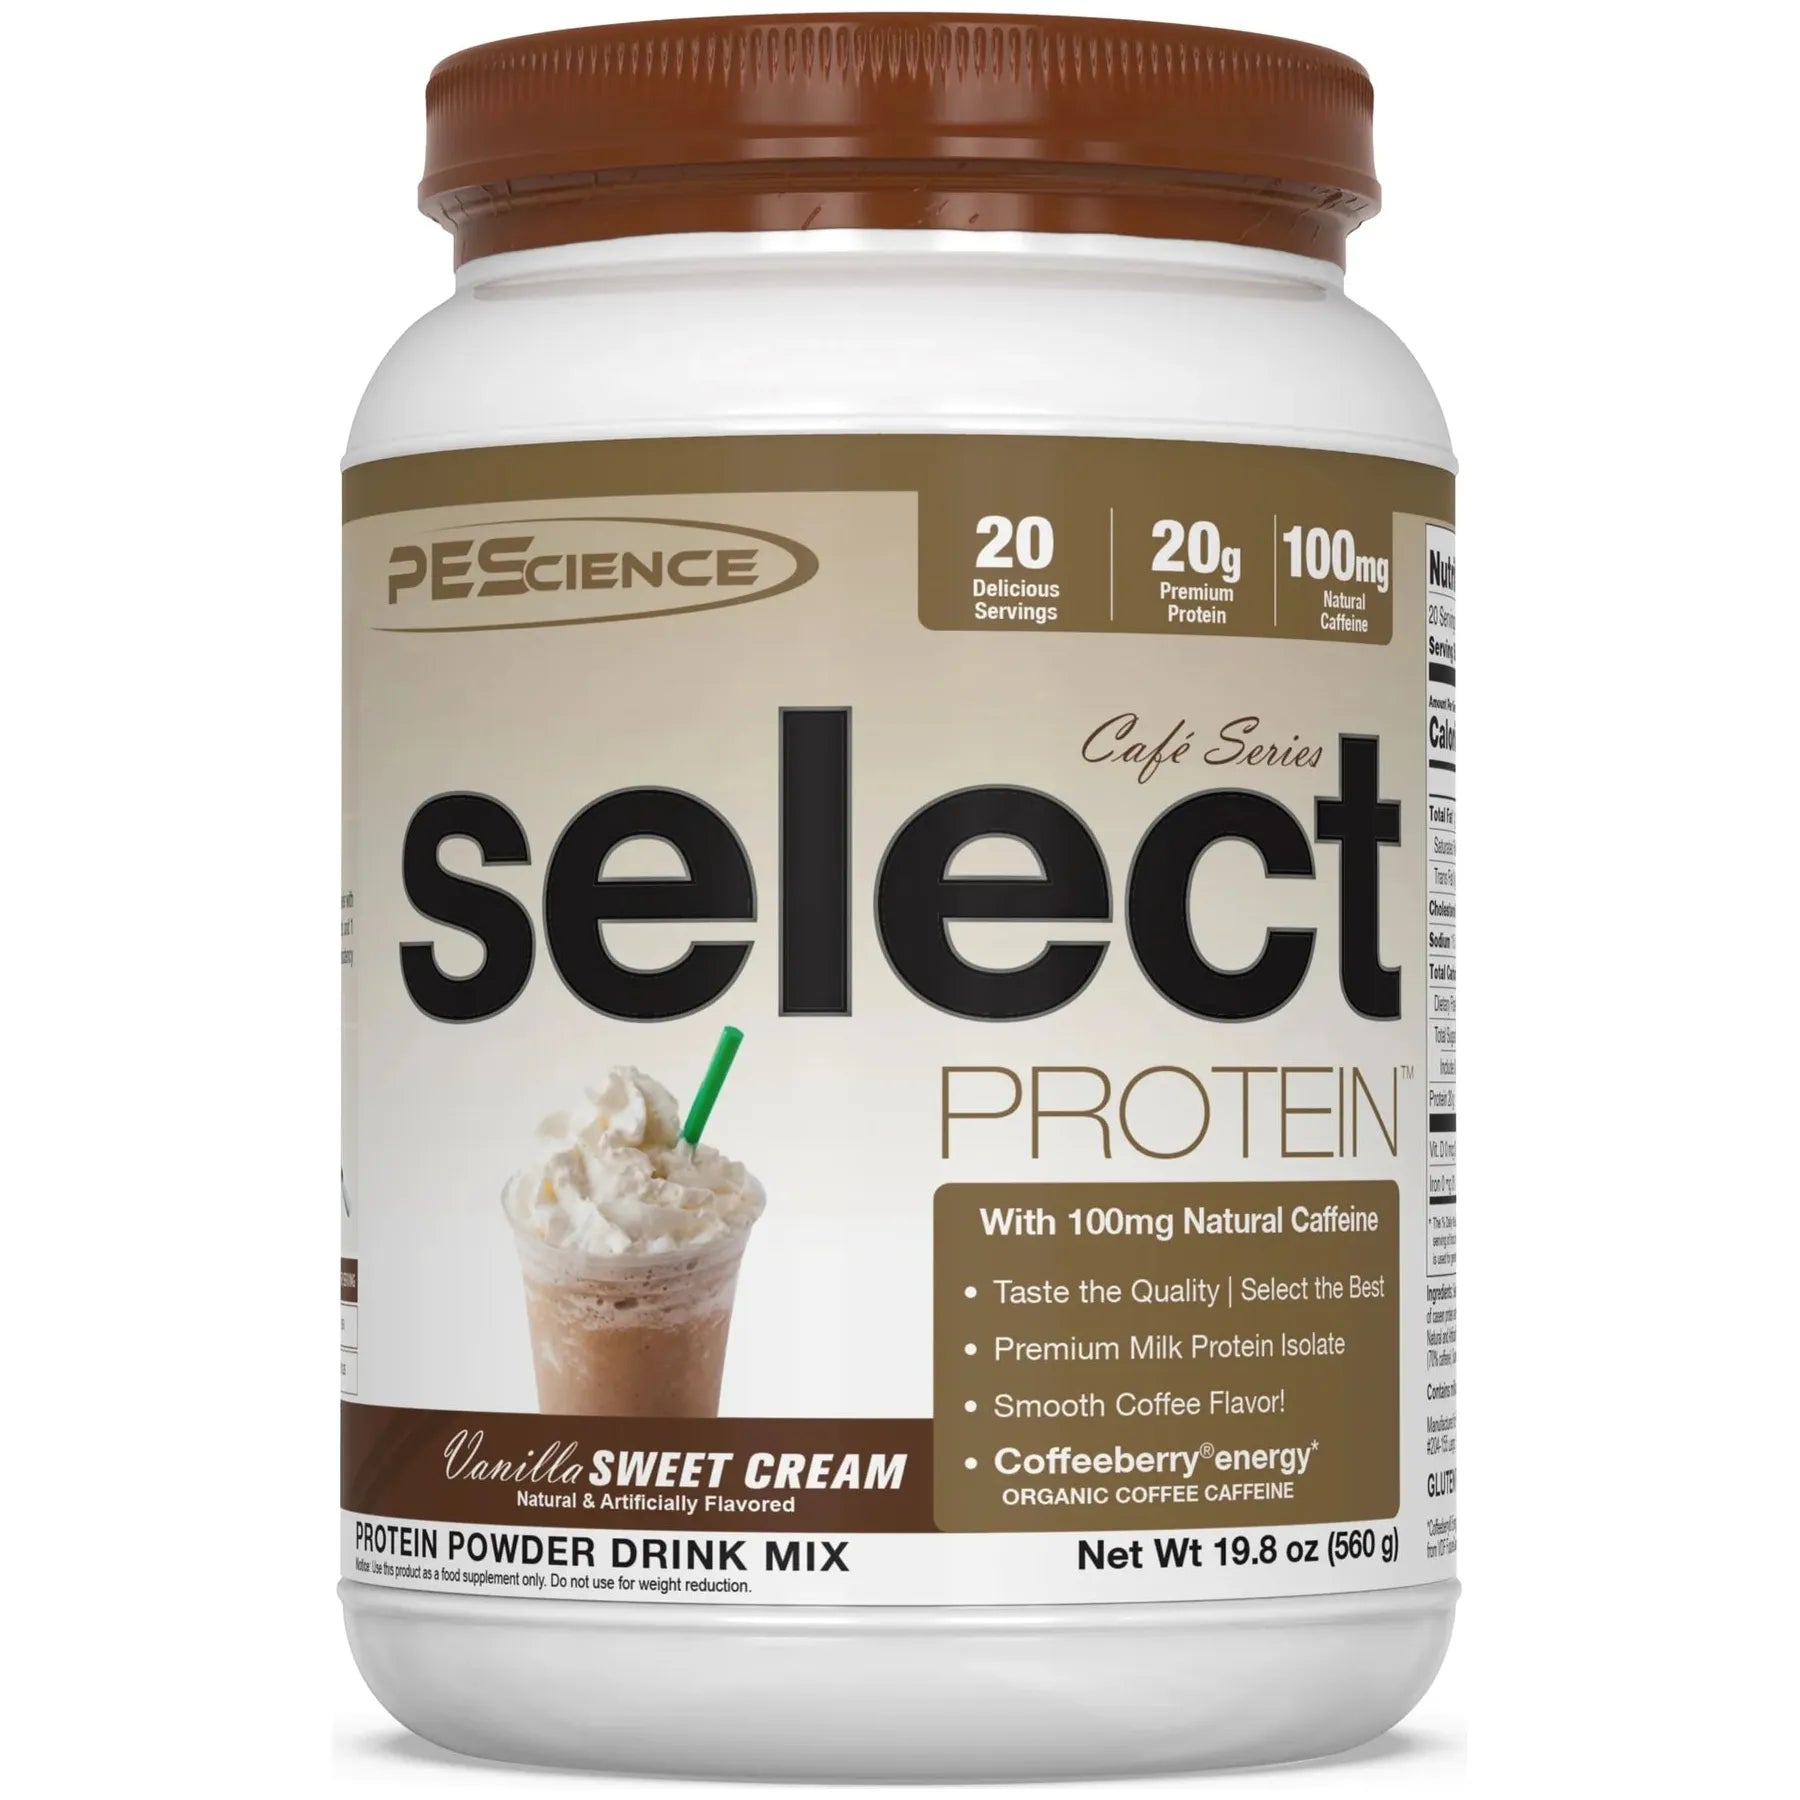 Pescience Select Café Protein (20 servings) Whey Protein Blend Vanilla Sweet Cream PEScience